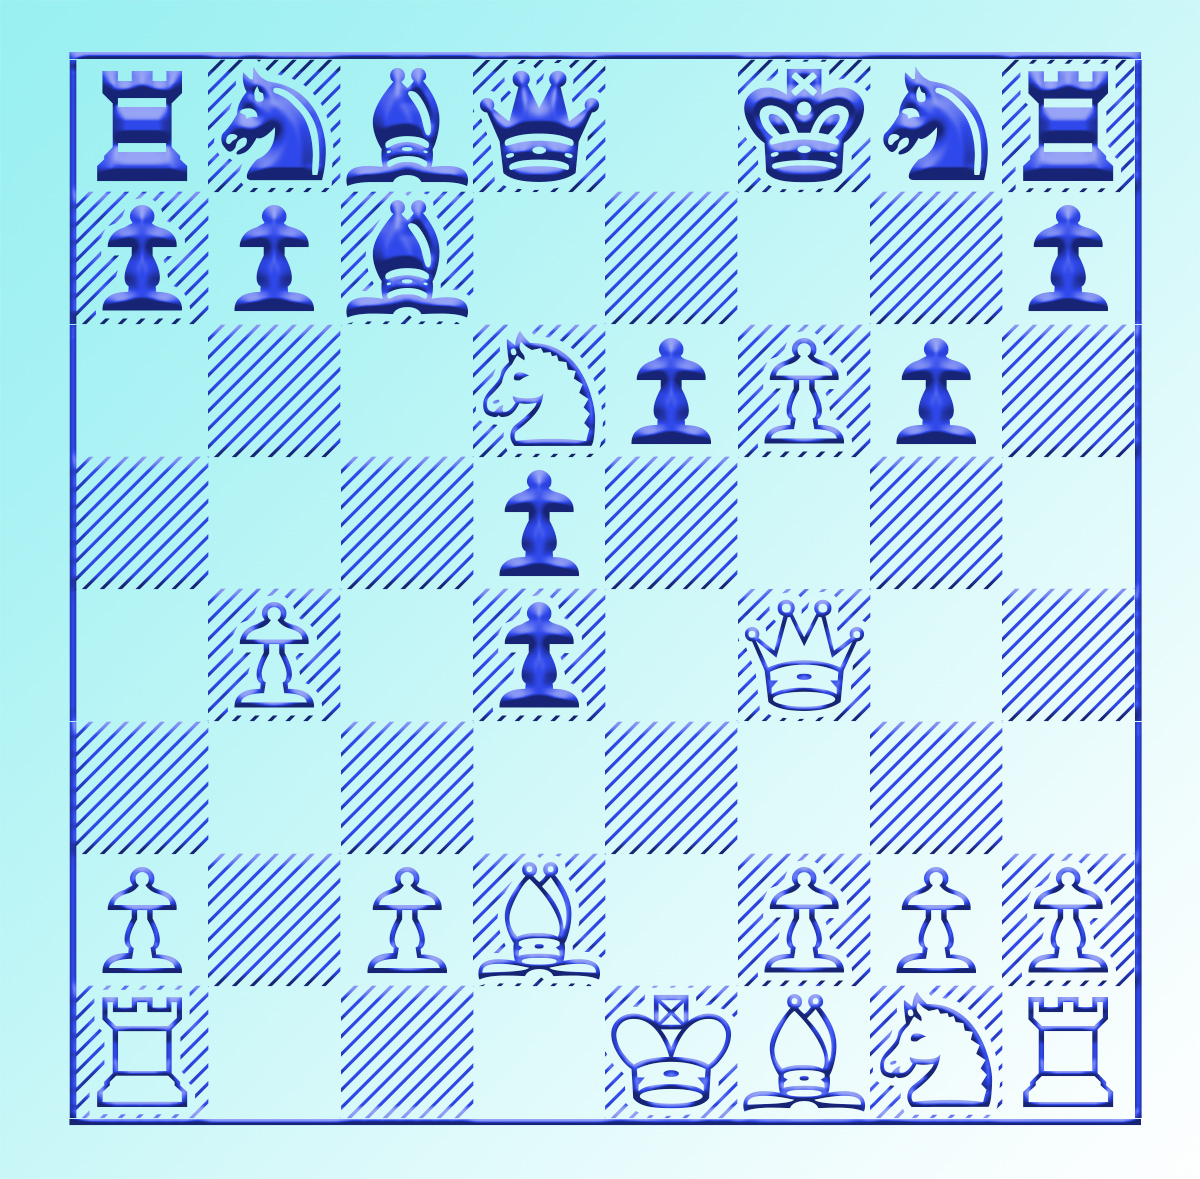 Queen's Gambit Accepted - Simple Solution to 1.d4 (7h Running Time)